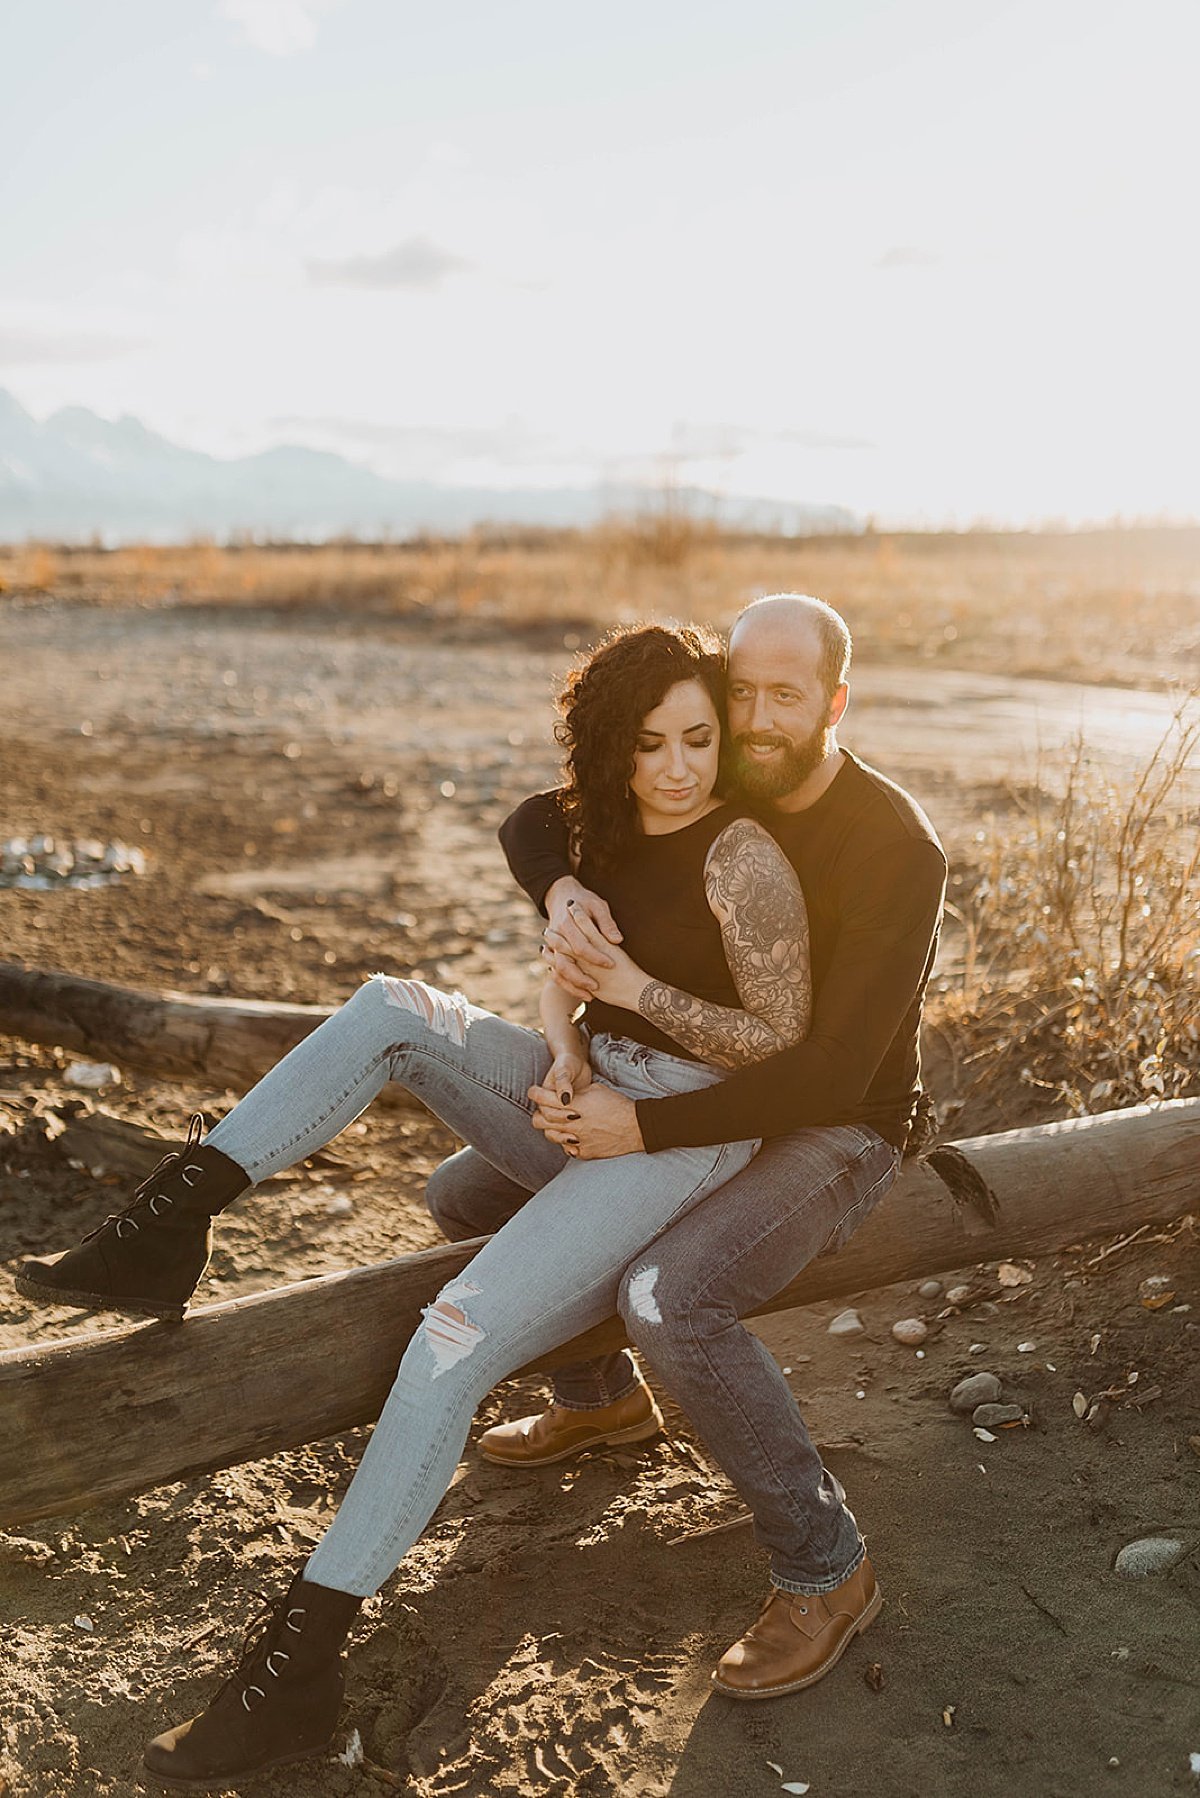  Hip outdoorsy couple with artsy tattoos pose on fallen log in engagement shoot by Alaska wedding photographer 